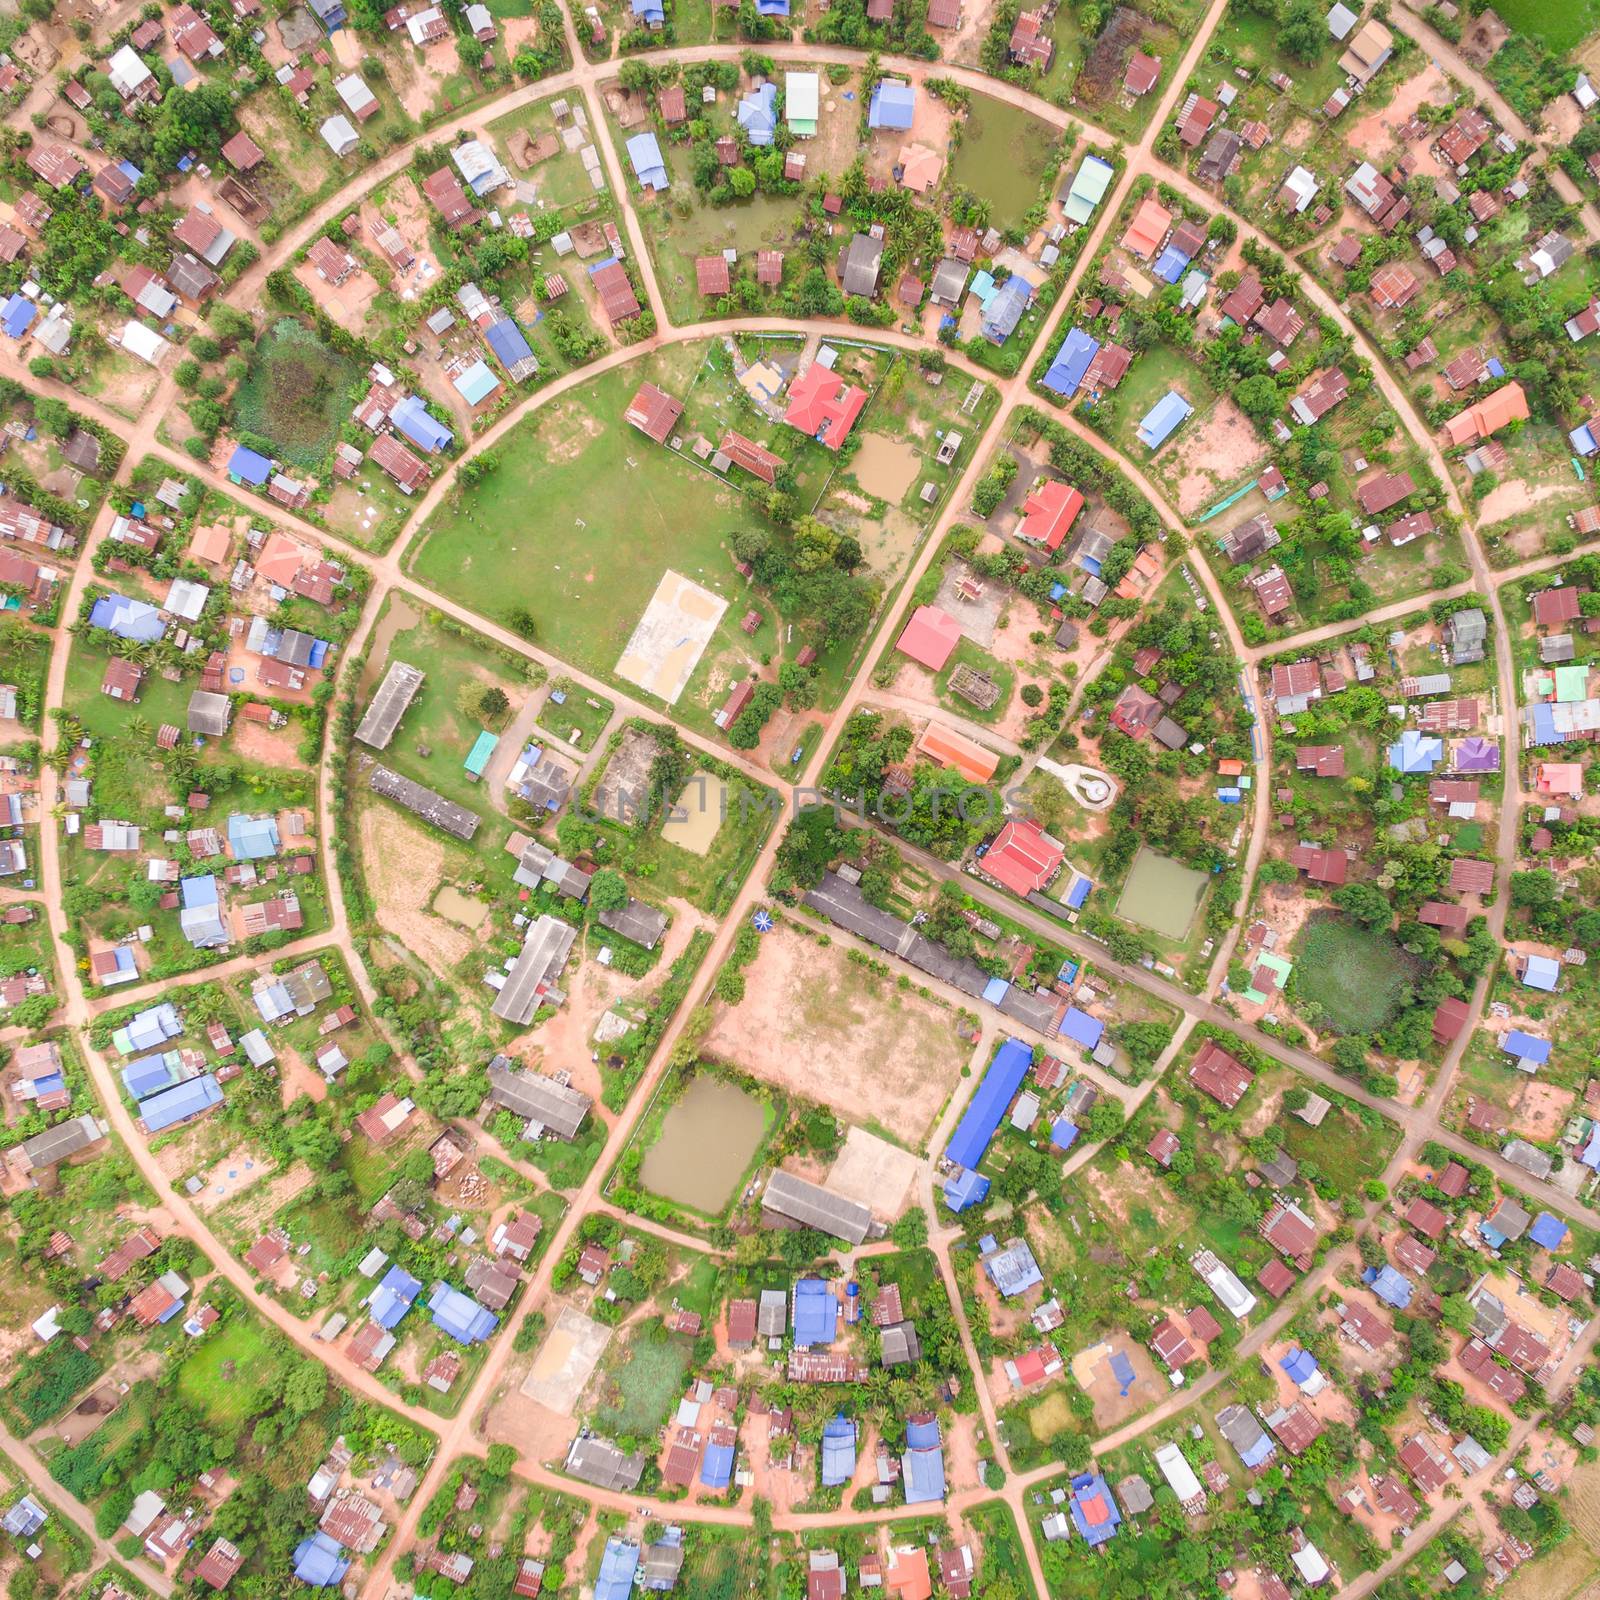 Aerial view of the village in a circle